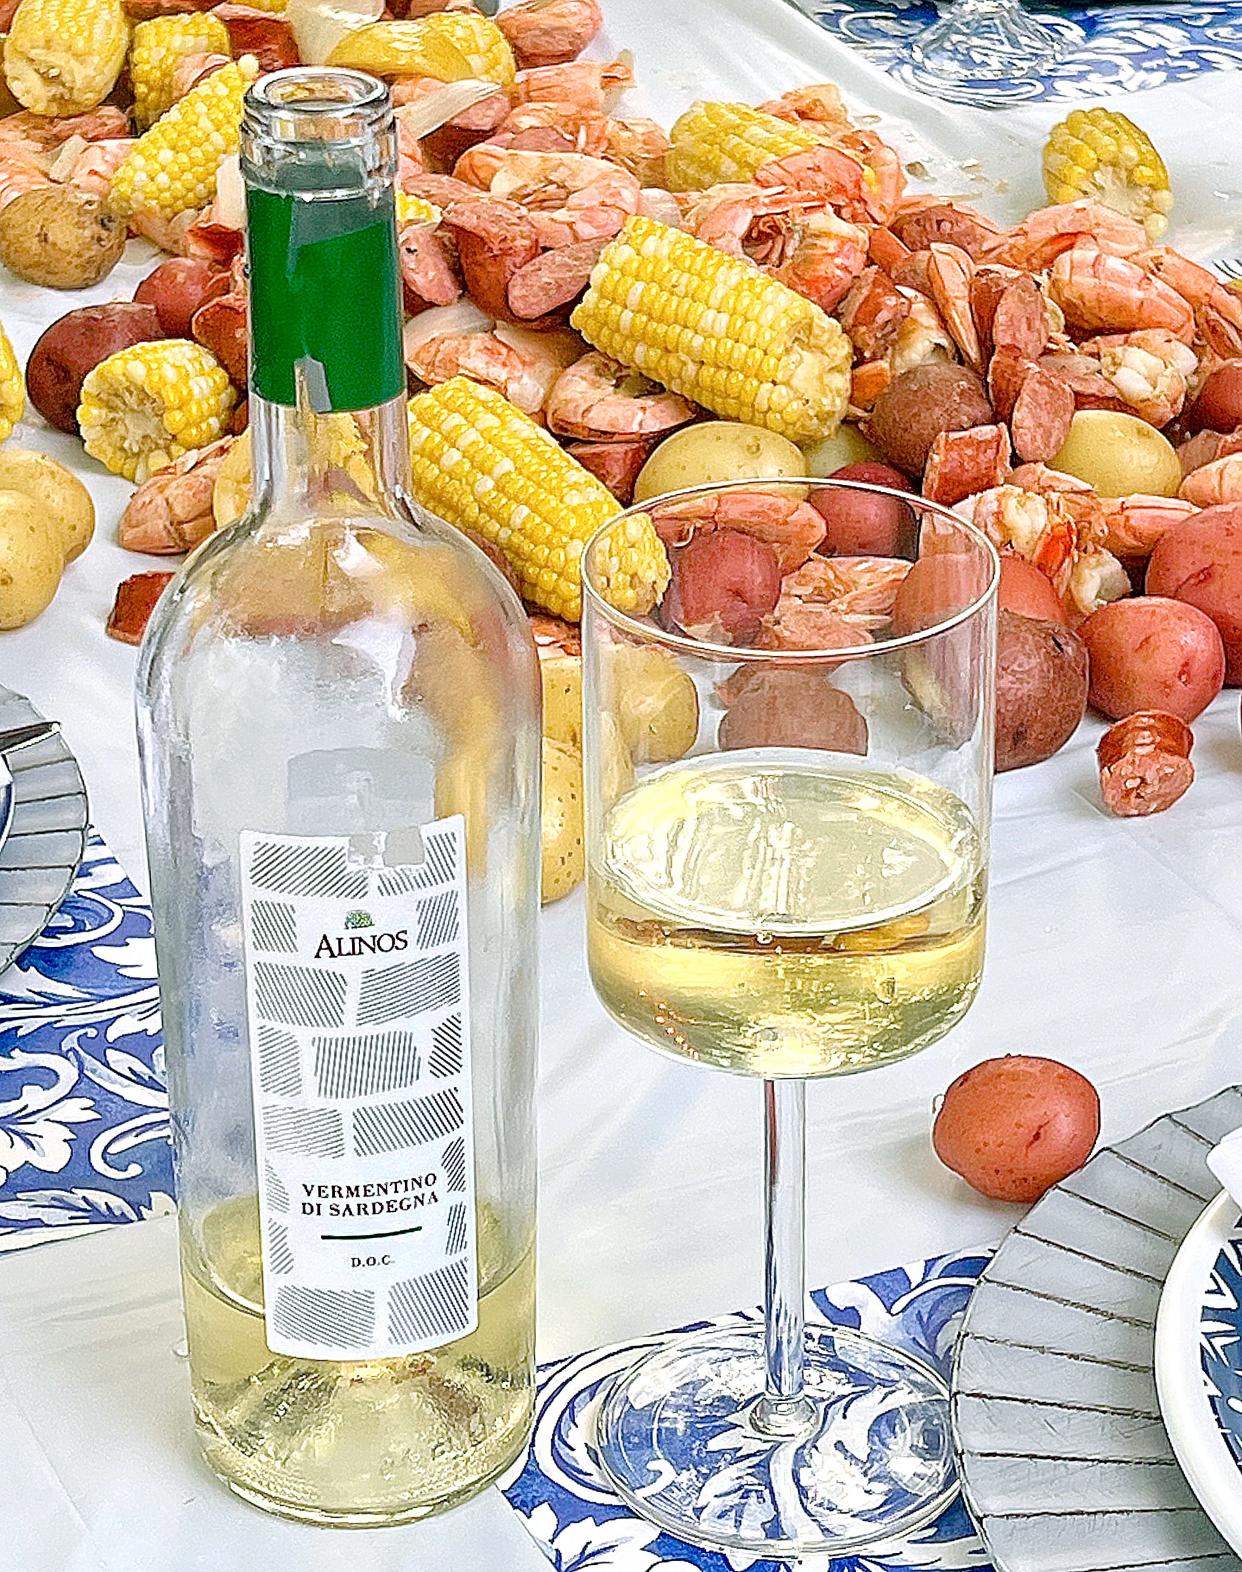 Alinos Vermentino di Sardegna is the perfect wine to have with a shrimp boil or clambake.